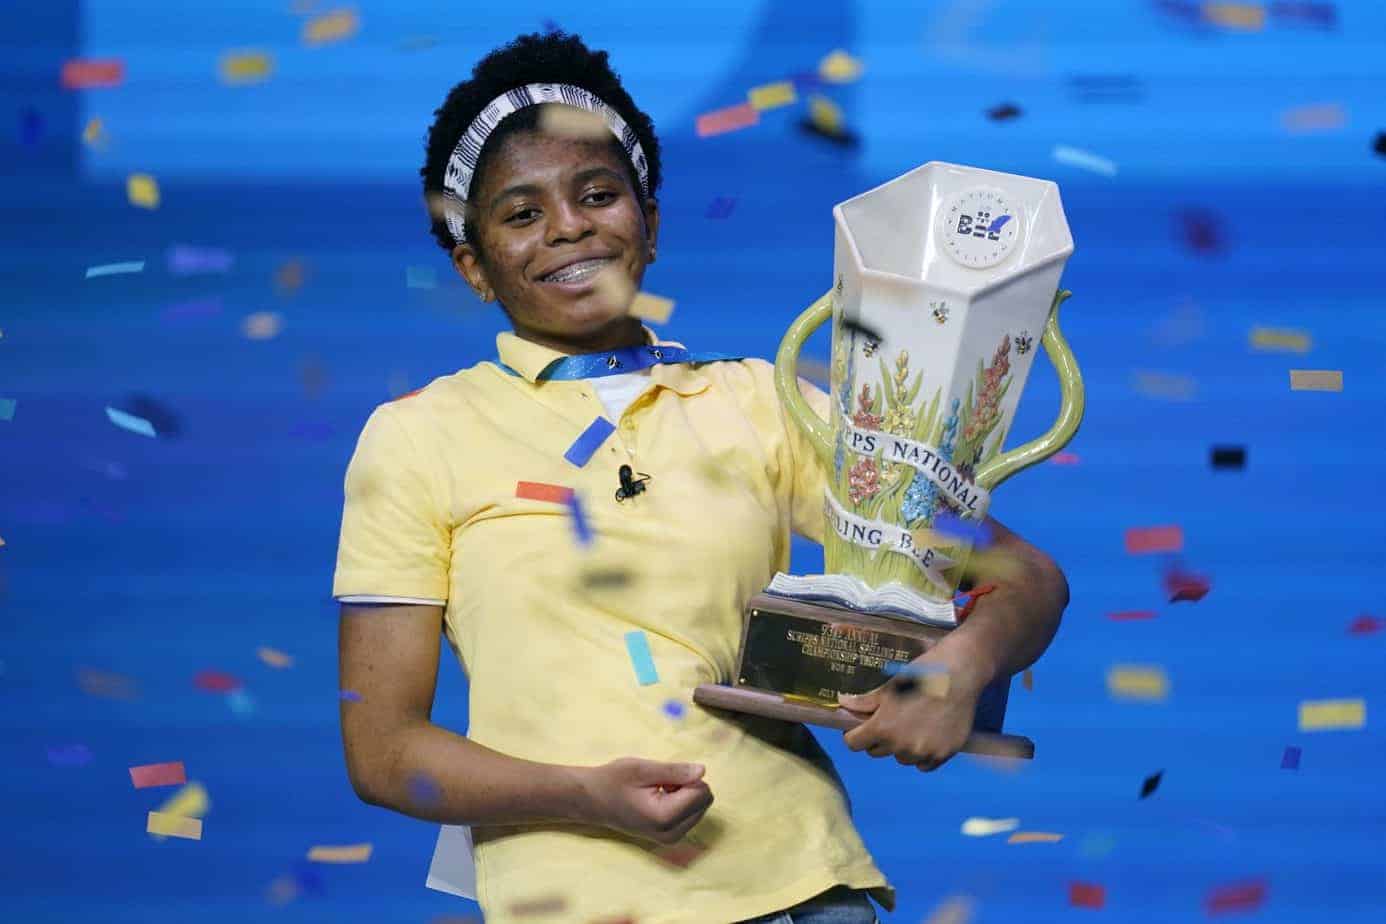 A video is surfacing of Scripps National Spelling Bee champion, Zaila Avant-garde, showing off ridiculous moves on a basketball court